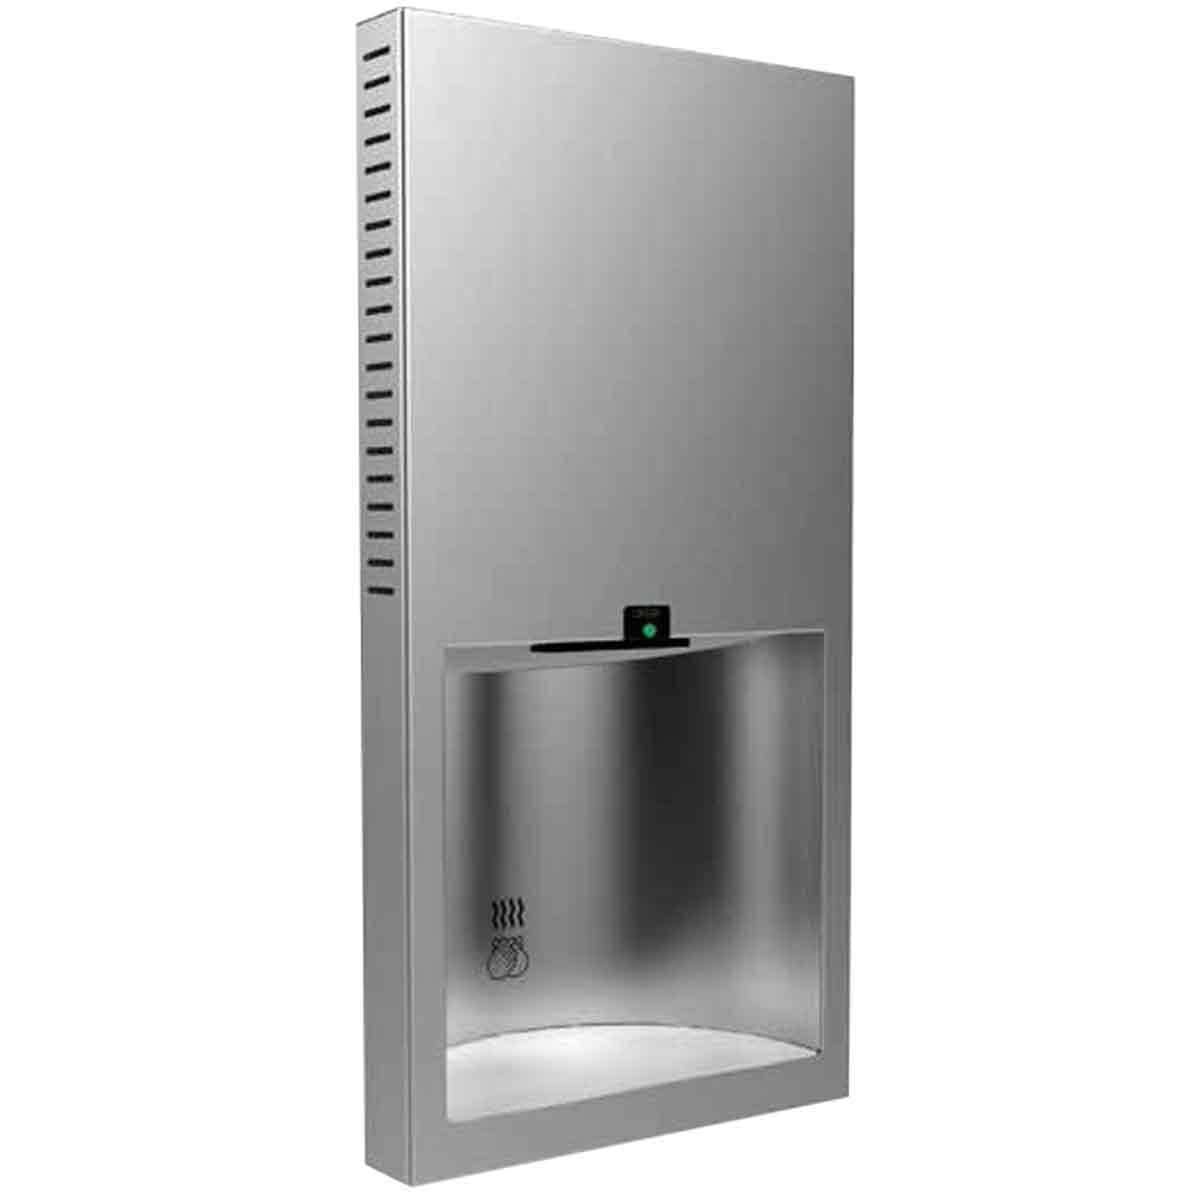 Bobrick B-3725 Automatic Hand Dryer, 230 Volt, Recessed-Mounted, Stainless Steel - TotalRestroom.com